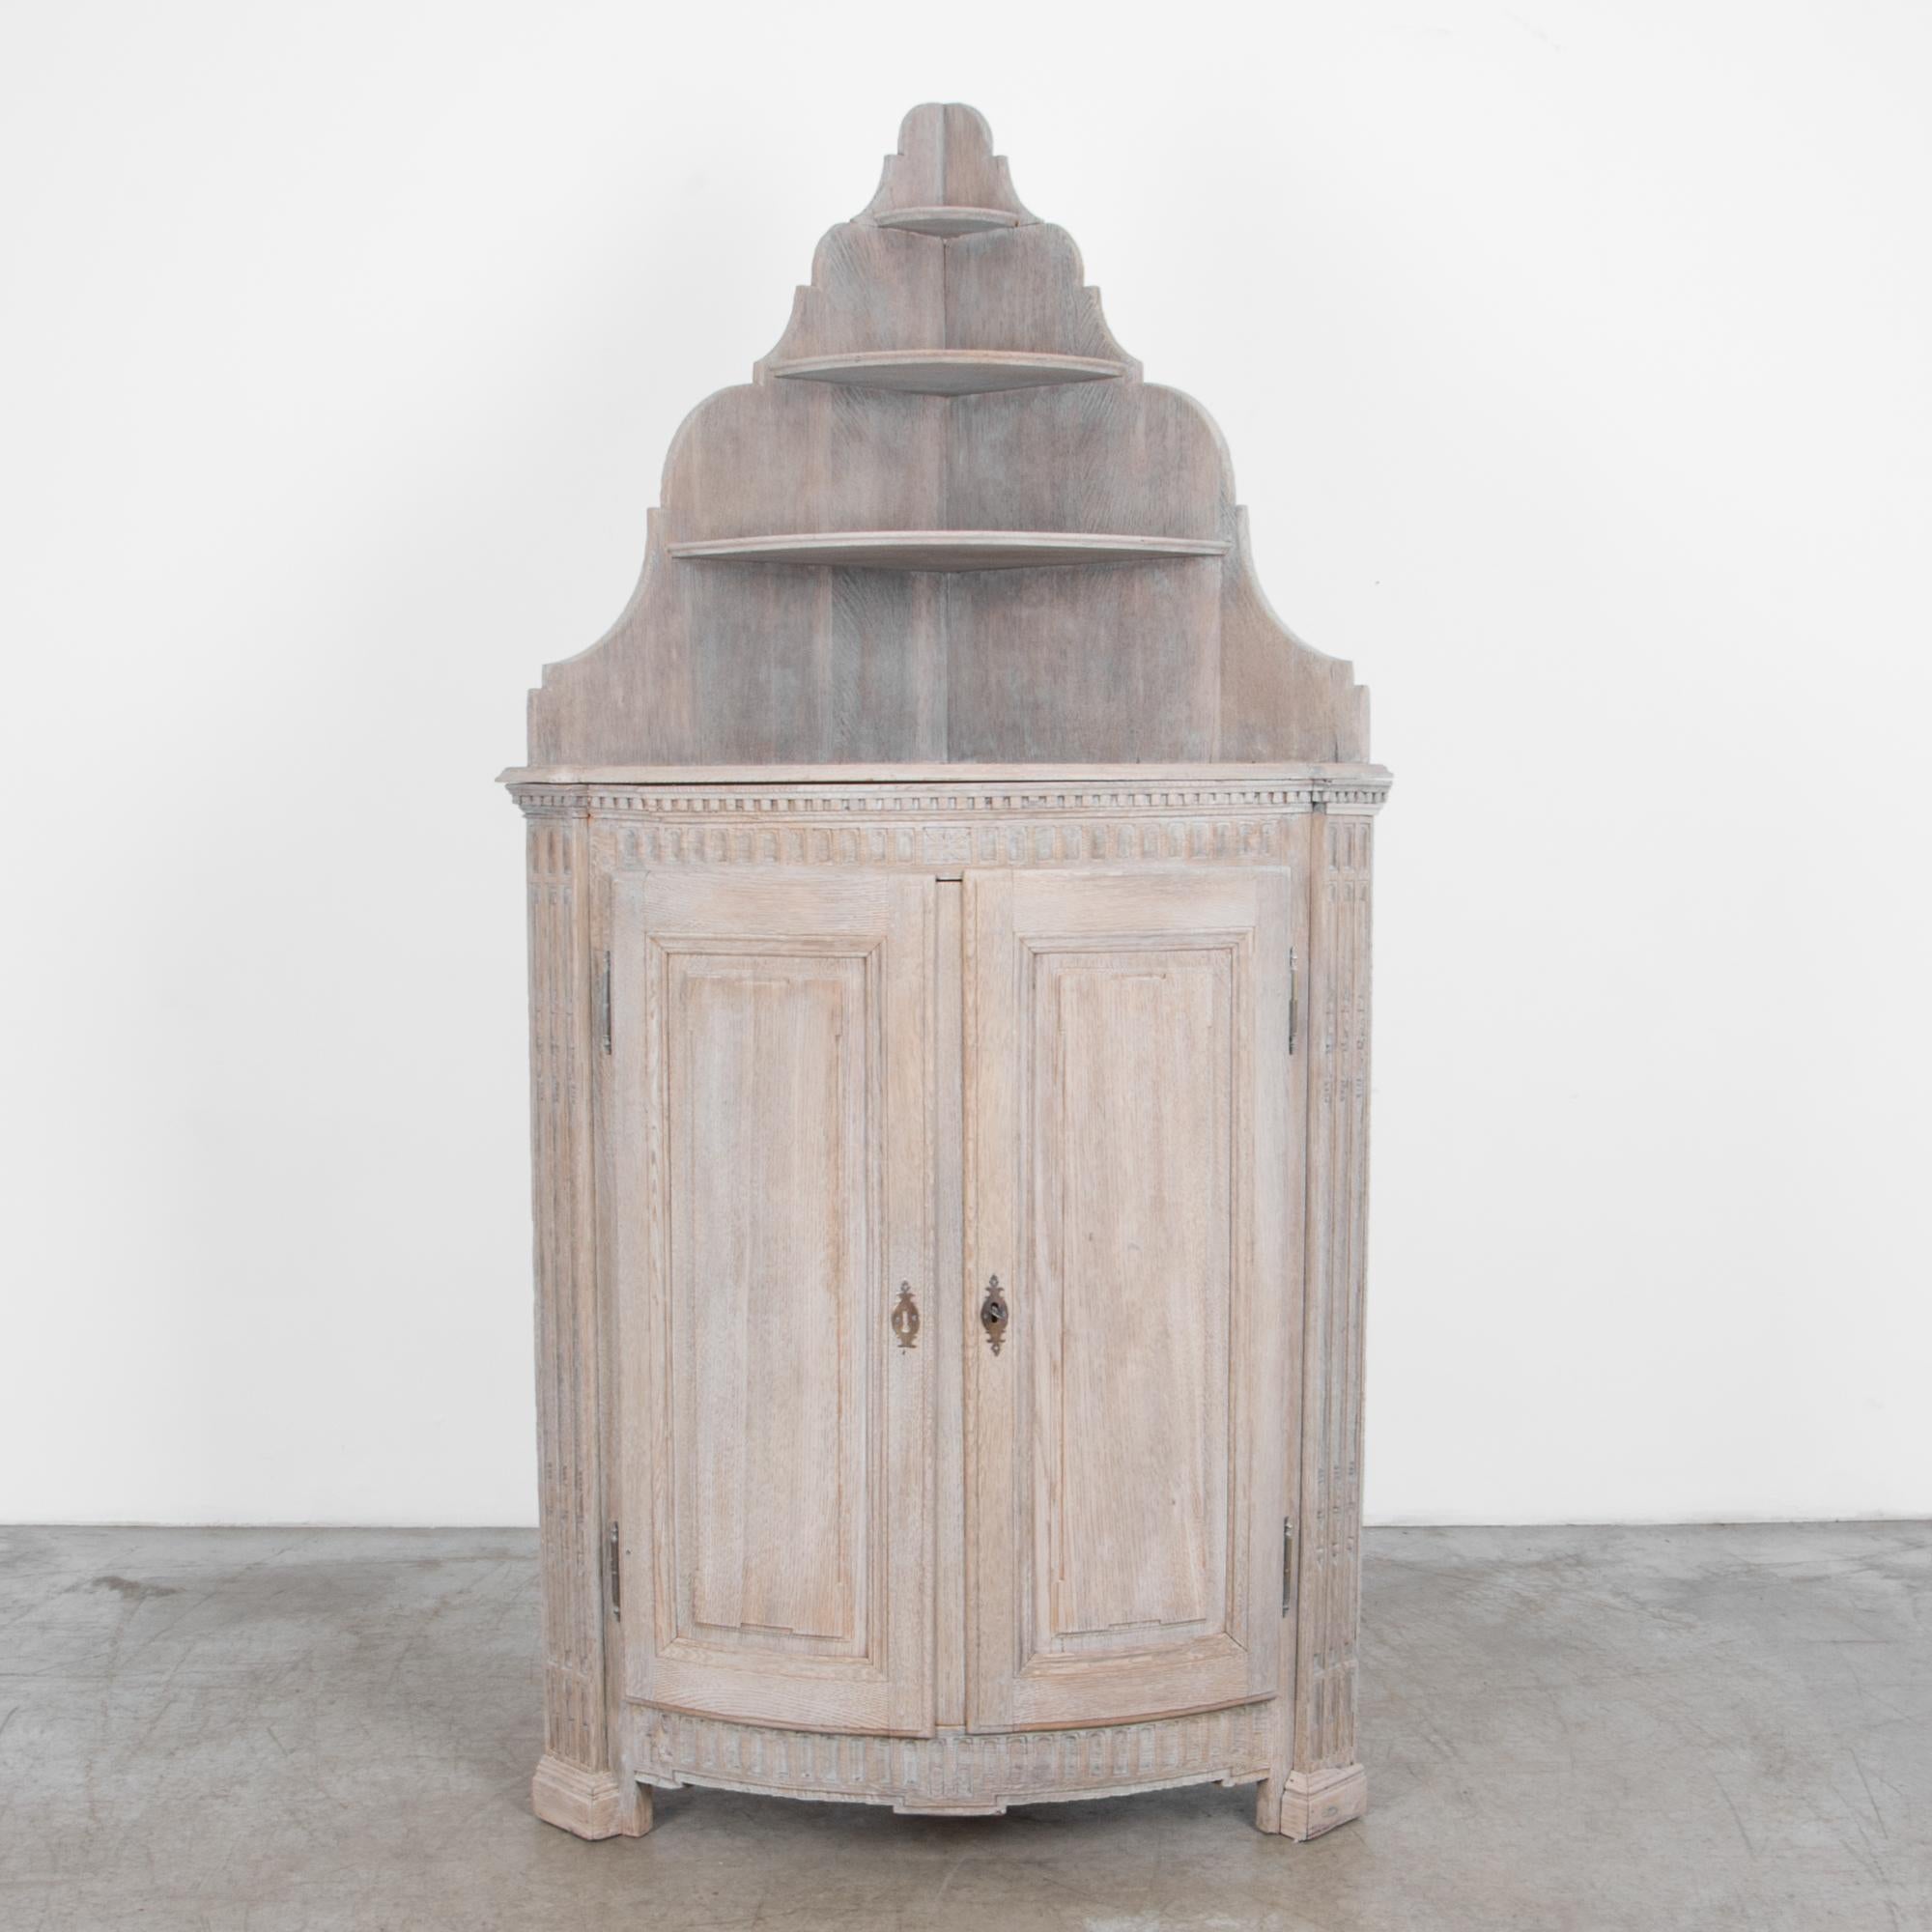 A Louis XVI style oak cabinet from circa 1820 France. Whitewashed with a subtle pigmented wax to enhance and rejuvenate the original finish, bringing out the texture of the wood grain. A driftwood look harmonises with the hand carved geometric